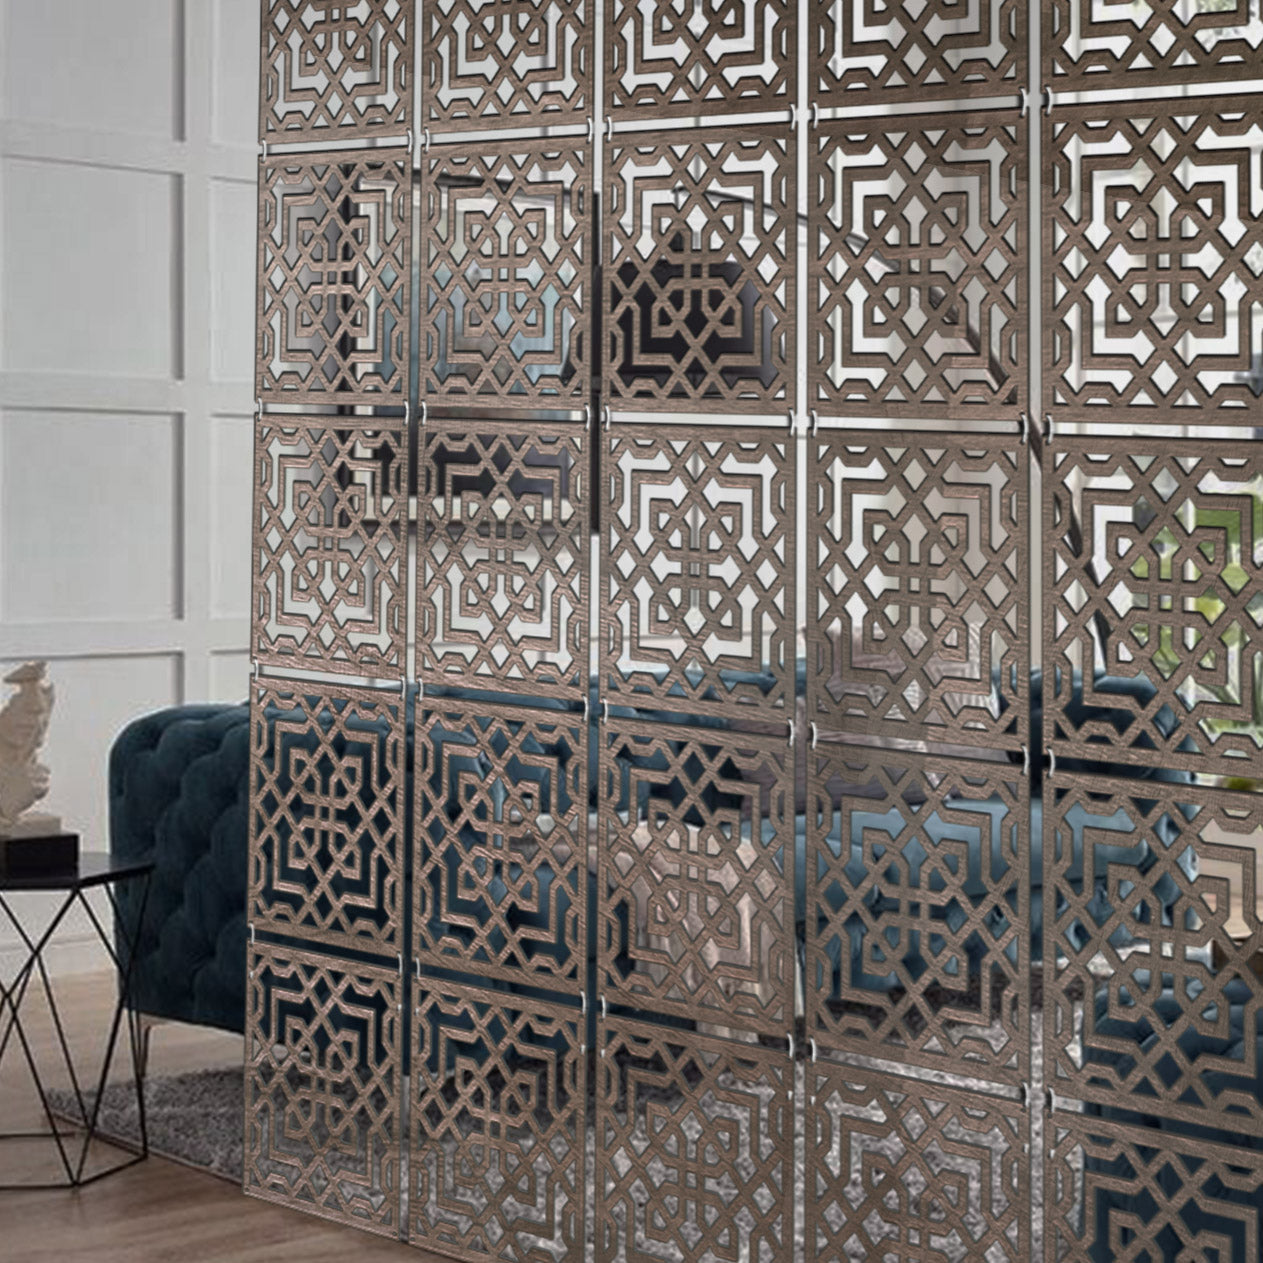 Hanging Room Divider, Wall Cover, Privacy Screens, dividers, hanging room dividers canada